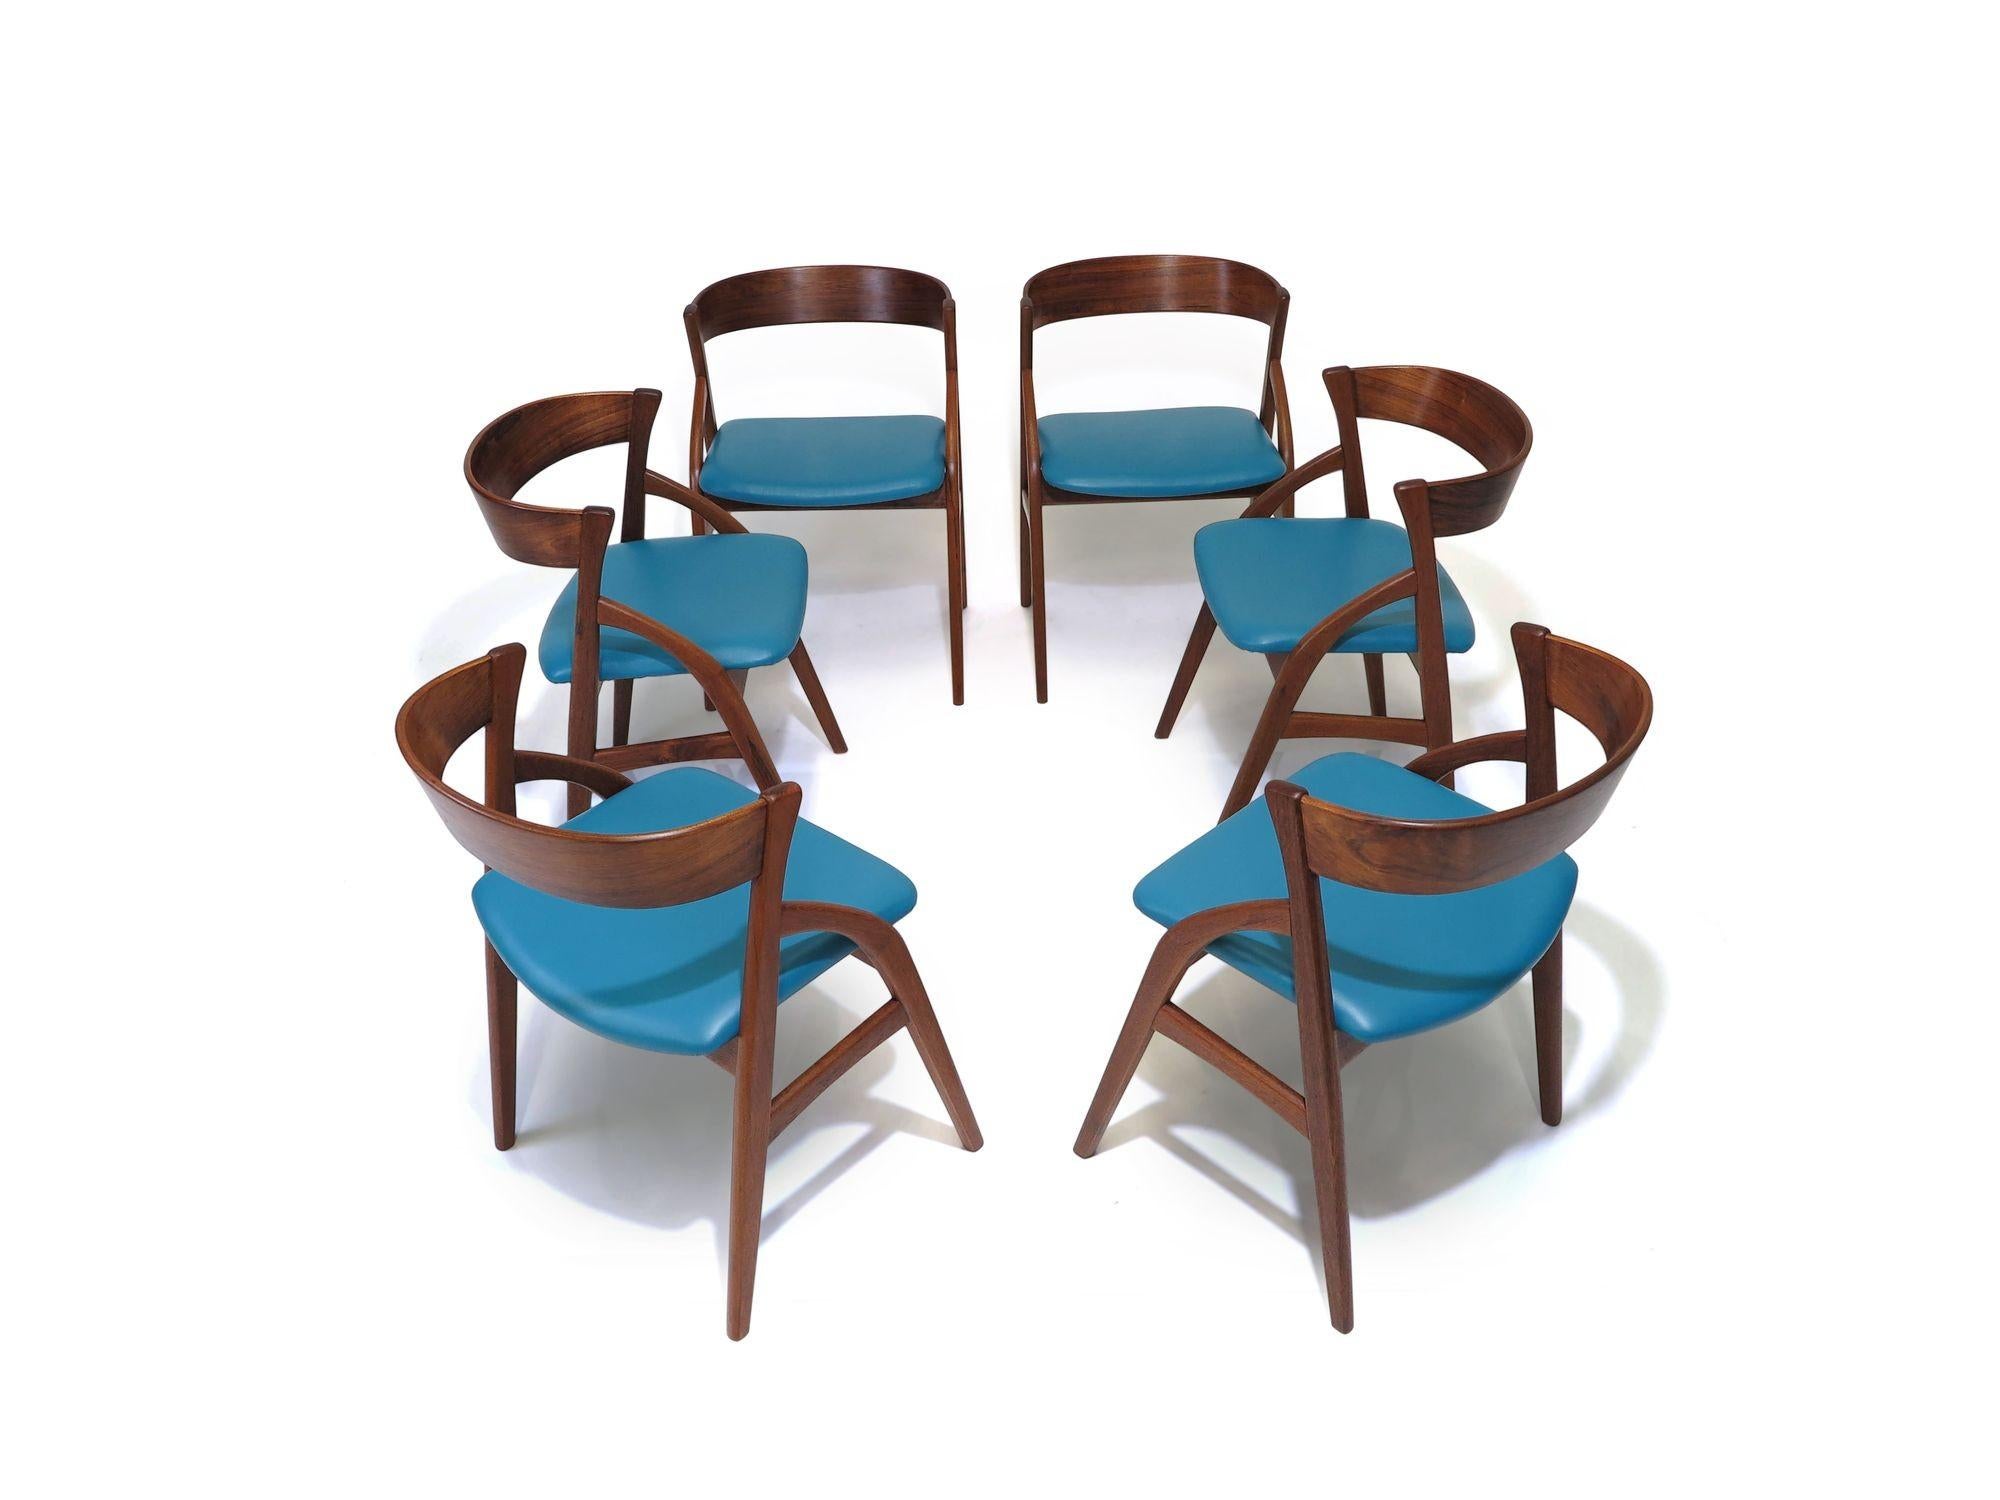 Set of six Mid-century Danish rosewood dining chairs handcrafted with arched frames and dramatic curved backrest. Perfectly restored frames and newly upholstered in blue leather. The chairs are very comfortable with supportive backs.
Measurements W